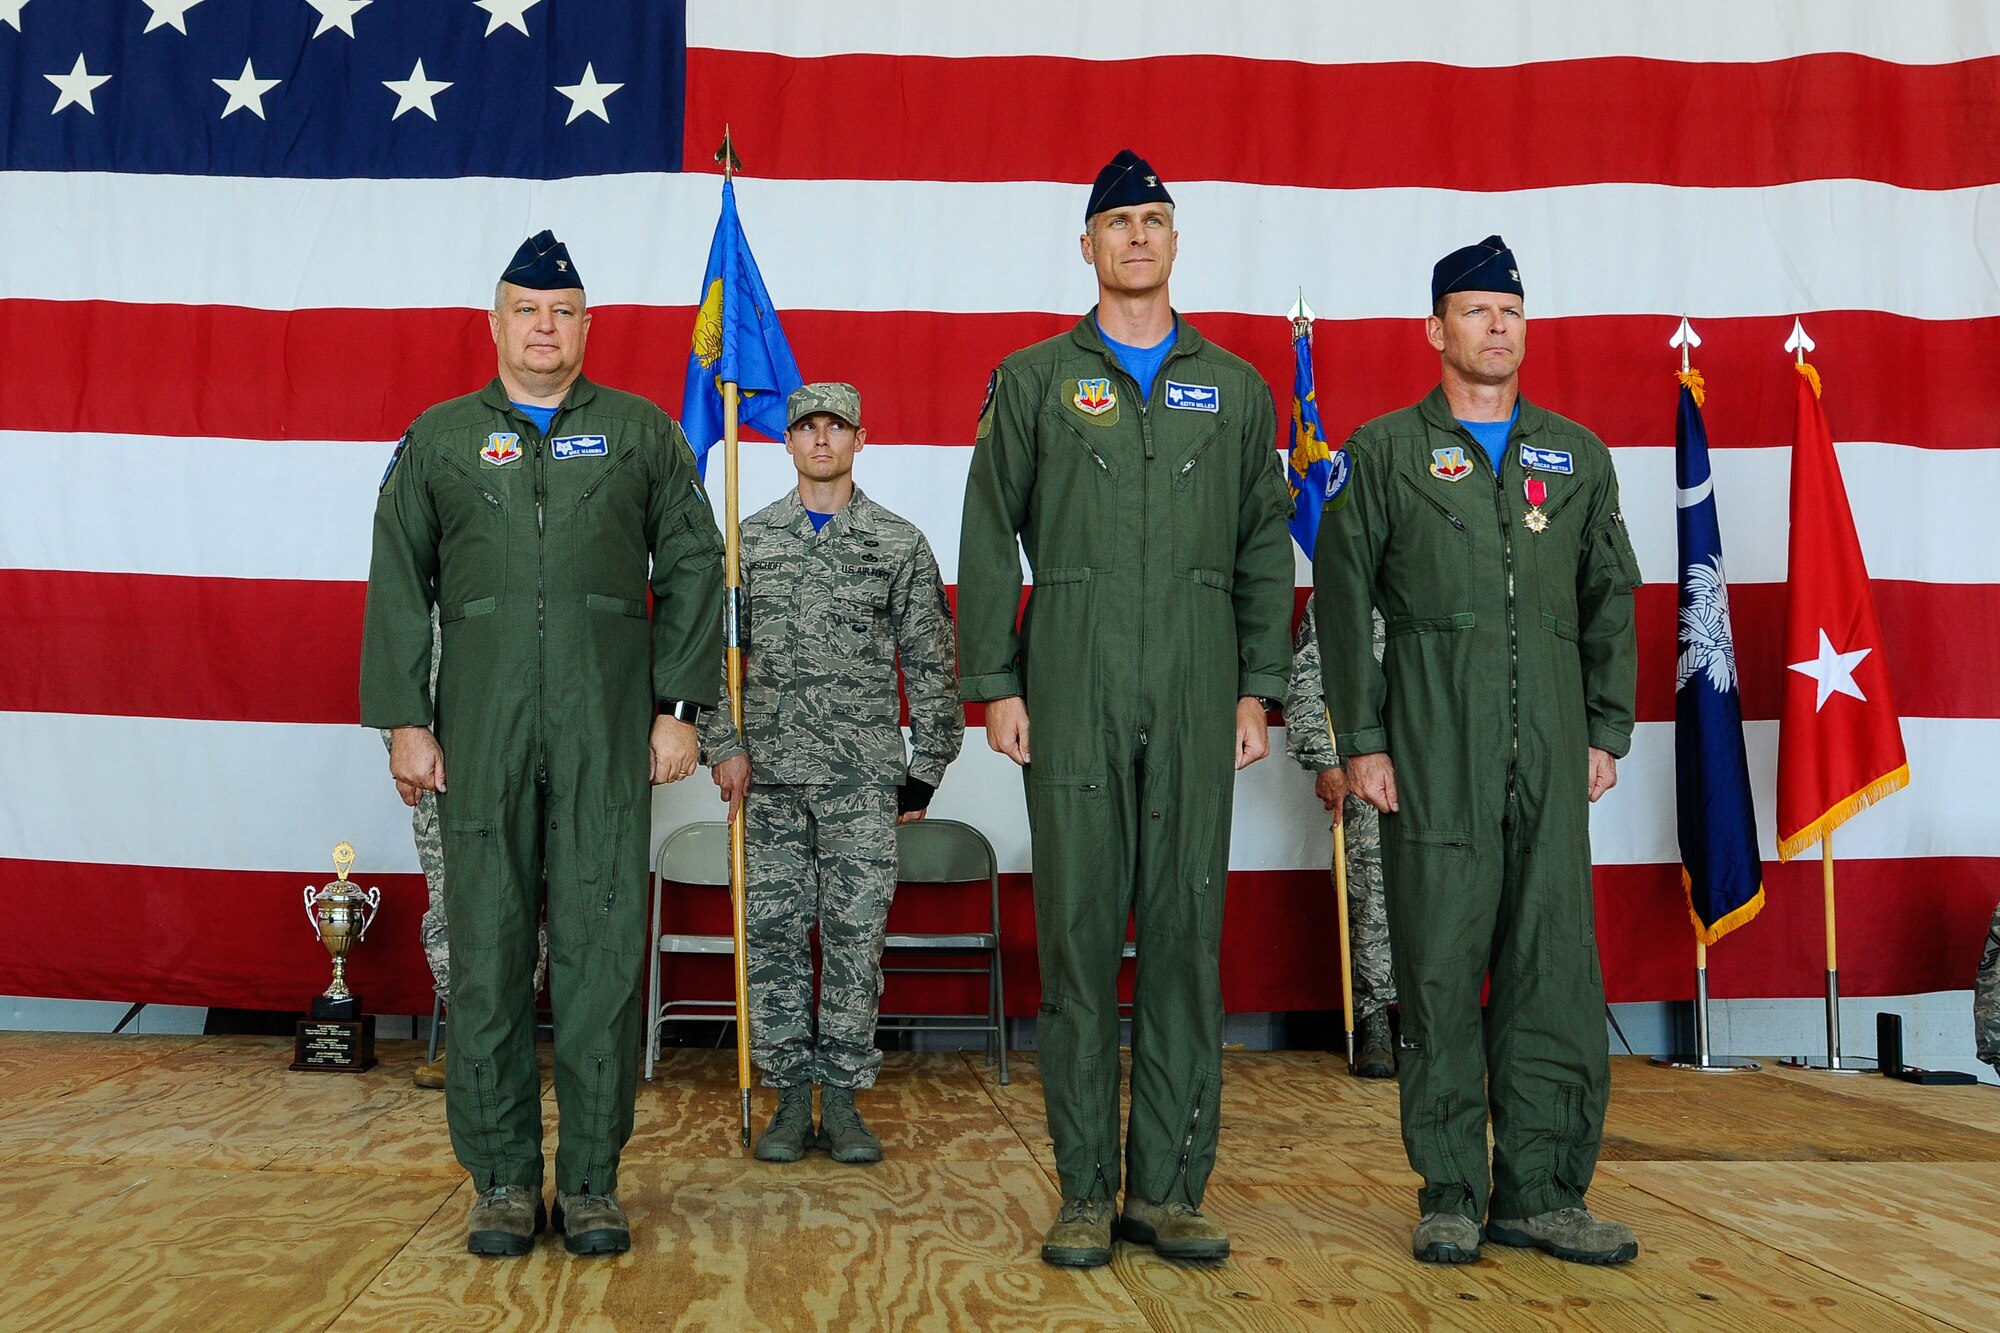 U.S. Airmen of the 169th Fighter Wing and the South Carolina Air National Guard, assemble for a change of command ceremony at McEntire Joint National Guard Base, S.C., May 3, 2014. Col. Michael Manning, left, presided over the exchange of the guidon as Col. Keith Miller, center, assumed command of the 169th Operations Group from Col. David Meyer, right. (U.S. Air National Guard photo by Tech. Sgt. Jorge Intriago/Released)